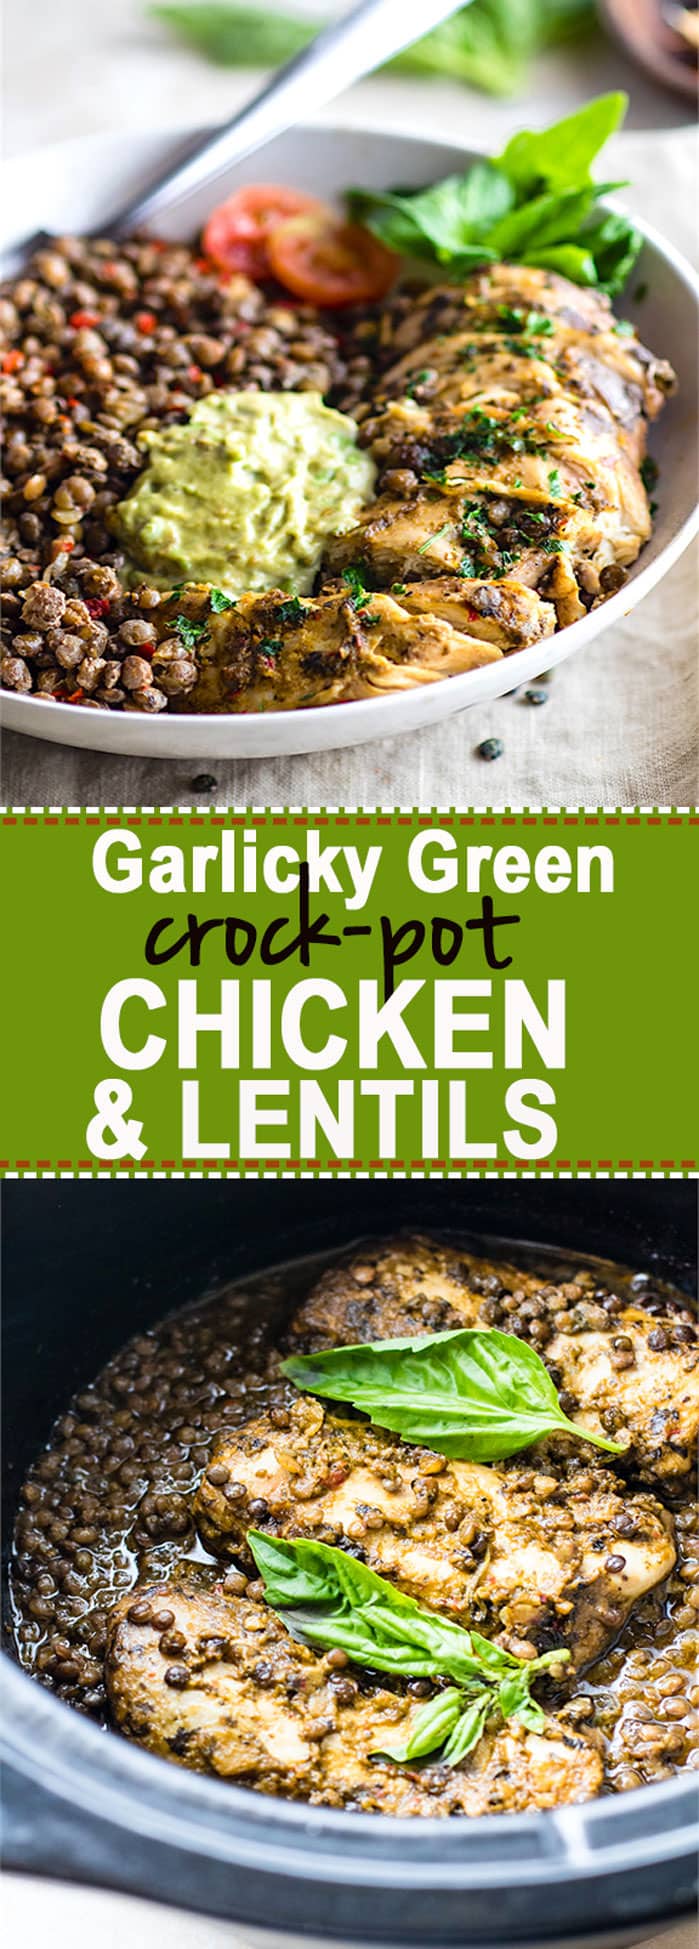 Simple Garlicky Green Crock-Pot Chicken and Lentils! A FLAVORFUL and fresh gluten free crock-pot chicken recipe that's packed full of fiber, nutrients, and protein. Easy to make in the crock-pot, healthy, and great for meal prep or family dinners made easy! @cottercrunch